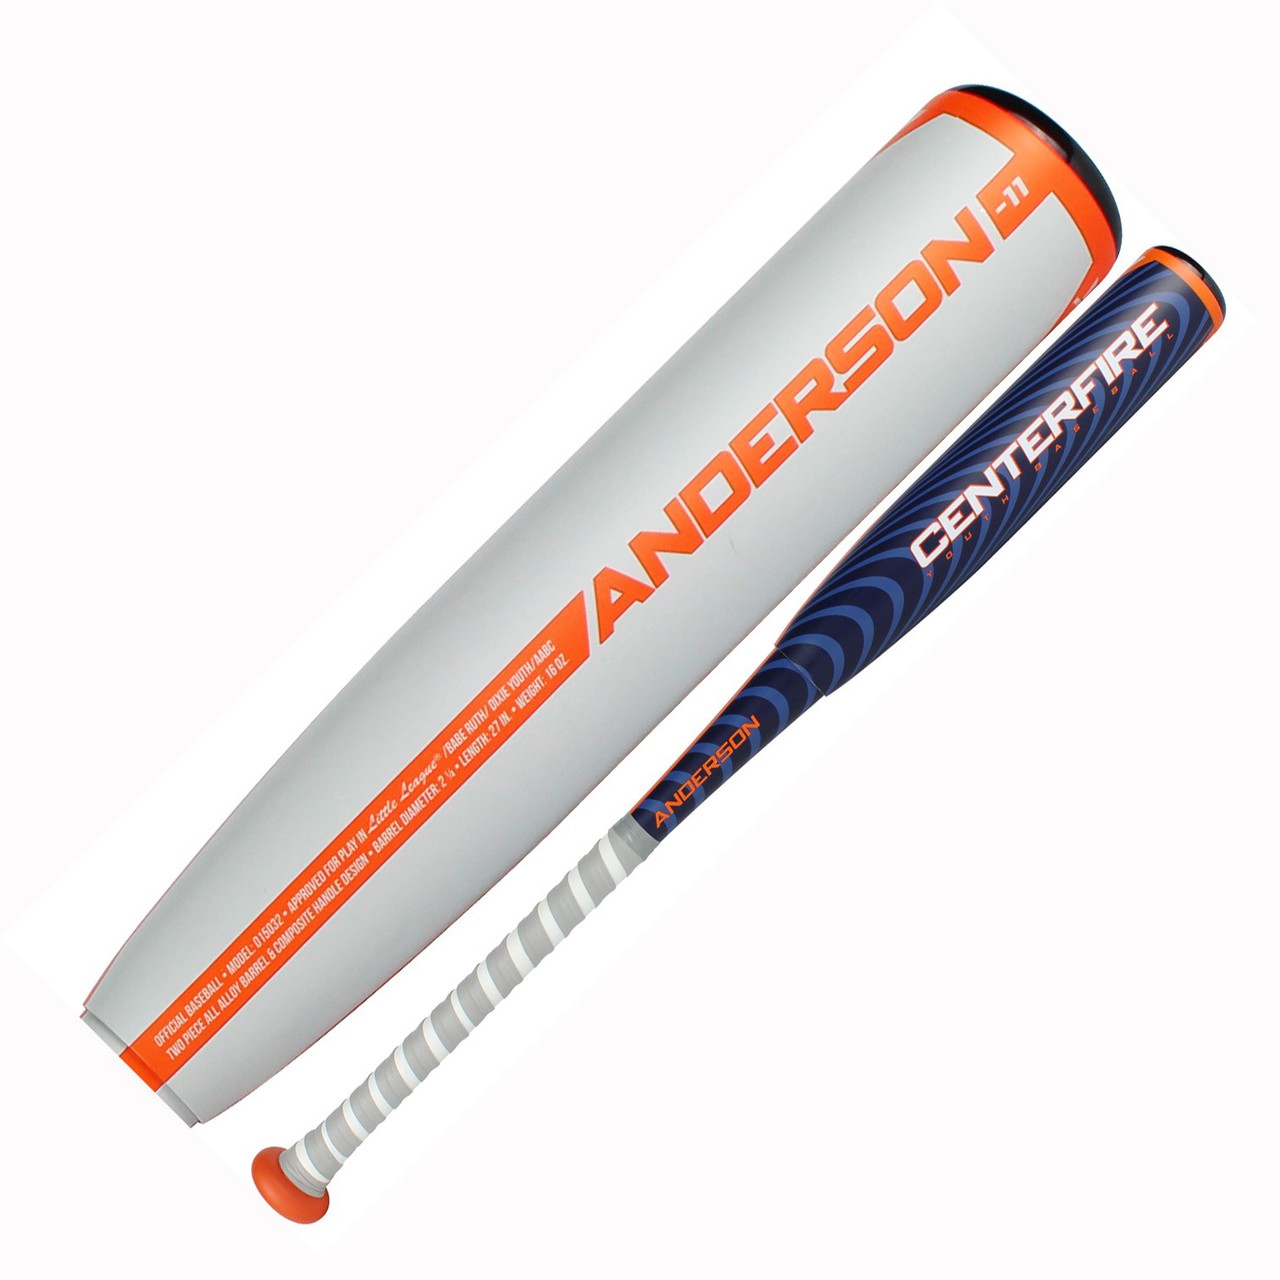 anderson-centerfire-27-inch-16-oz-youth-baseball-bat 015032-27-inch-16-oz Anderson 874147007679 The Anderson Centerfire baseball bat is our latest addition to our